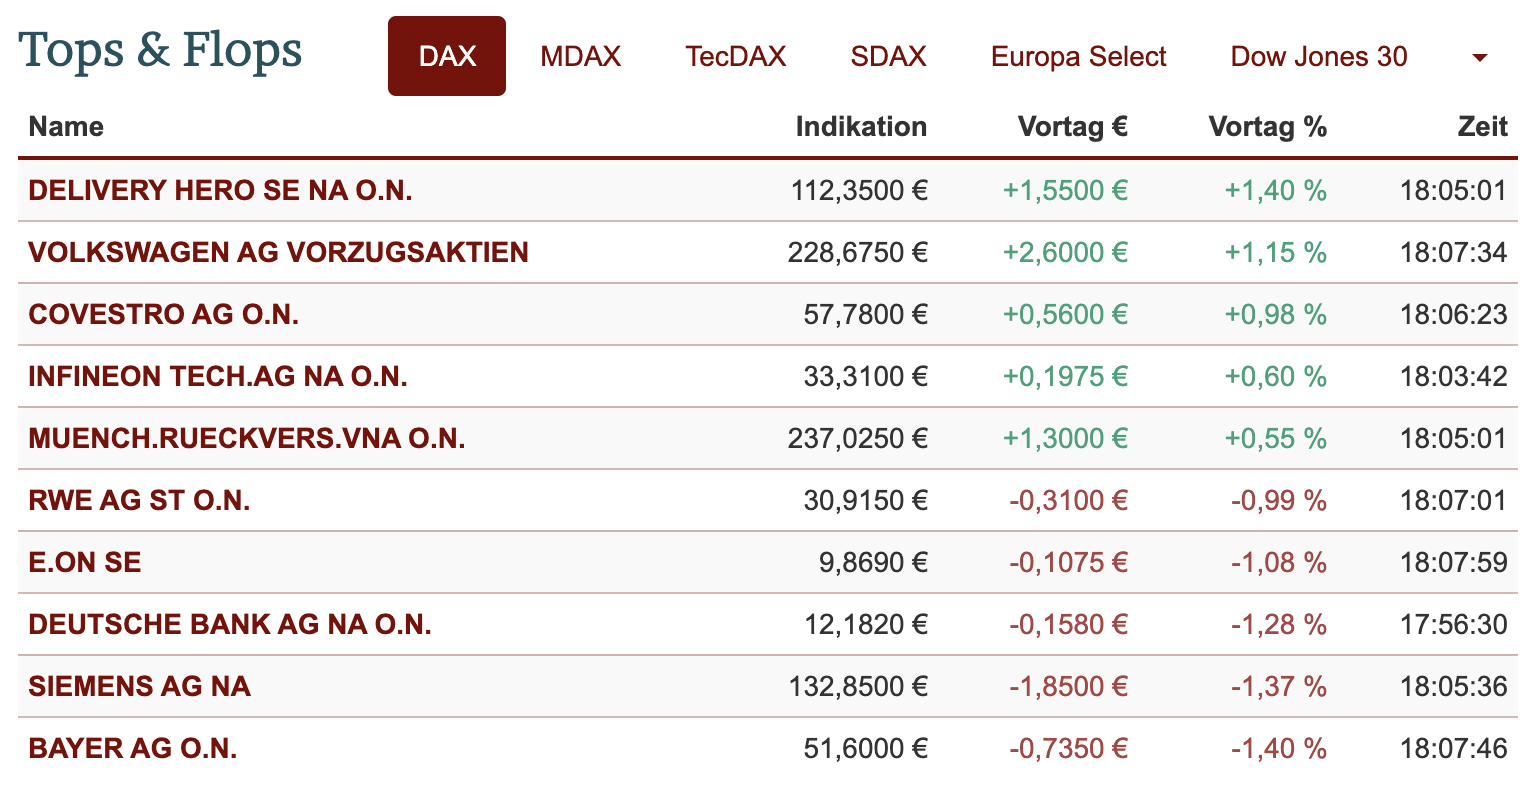 20210531-dax-intraday.png